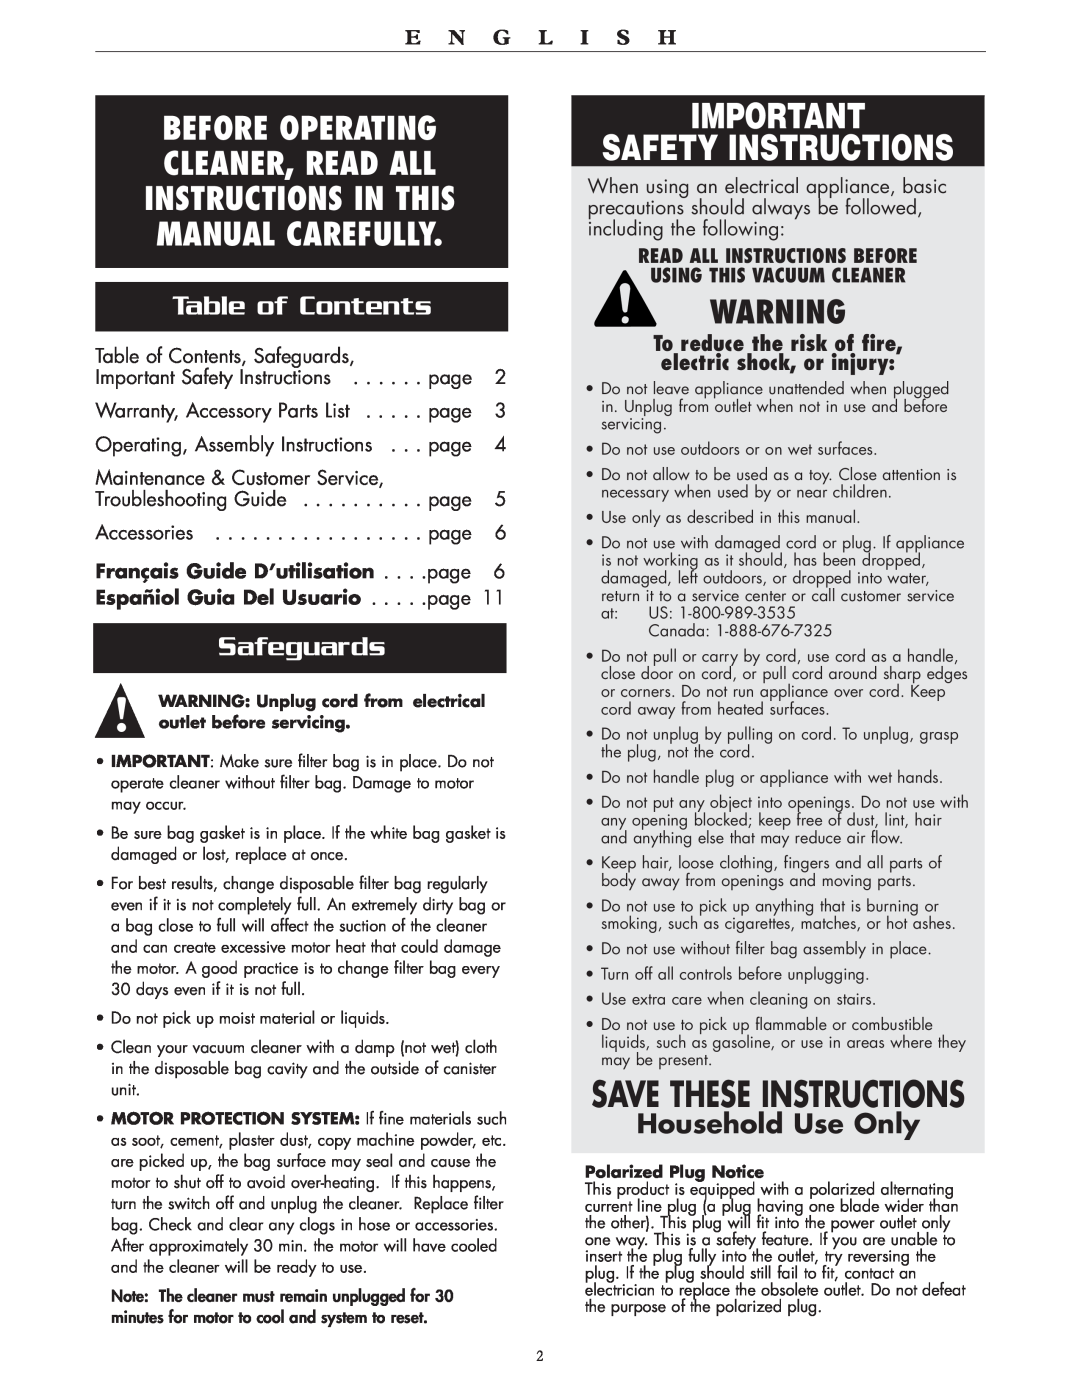 Oreck BB870-AW, BB870AD Safety Instructions, Save These Instructions, Table of Contents, Safeguards, Household Use Only 